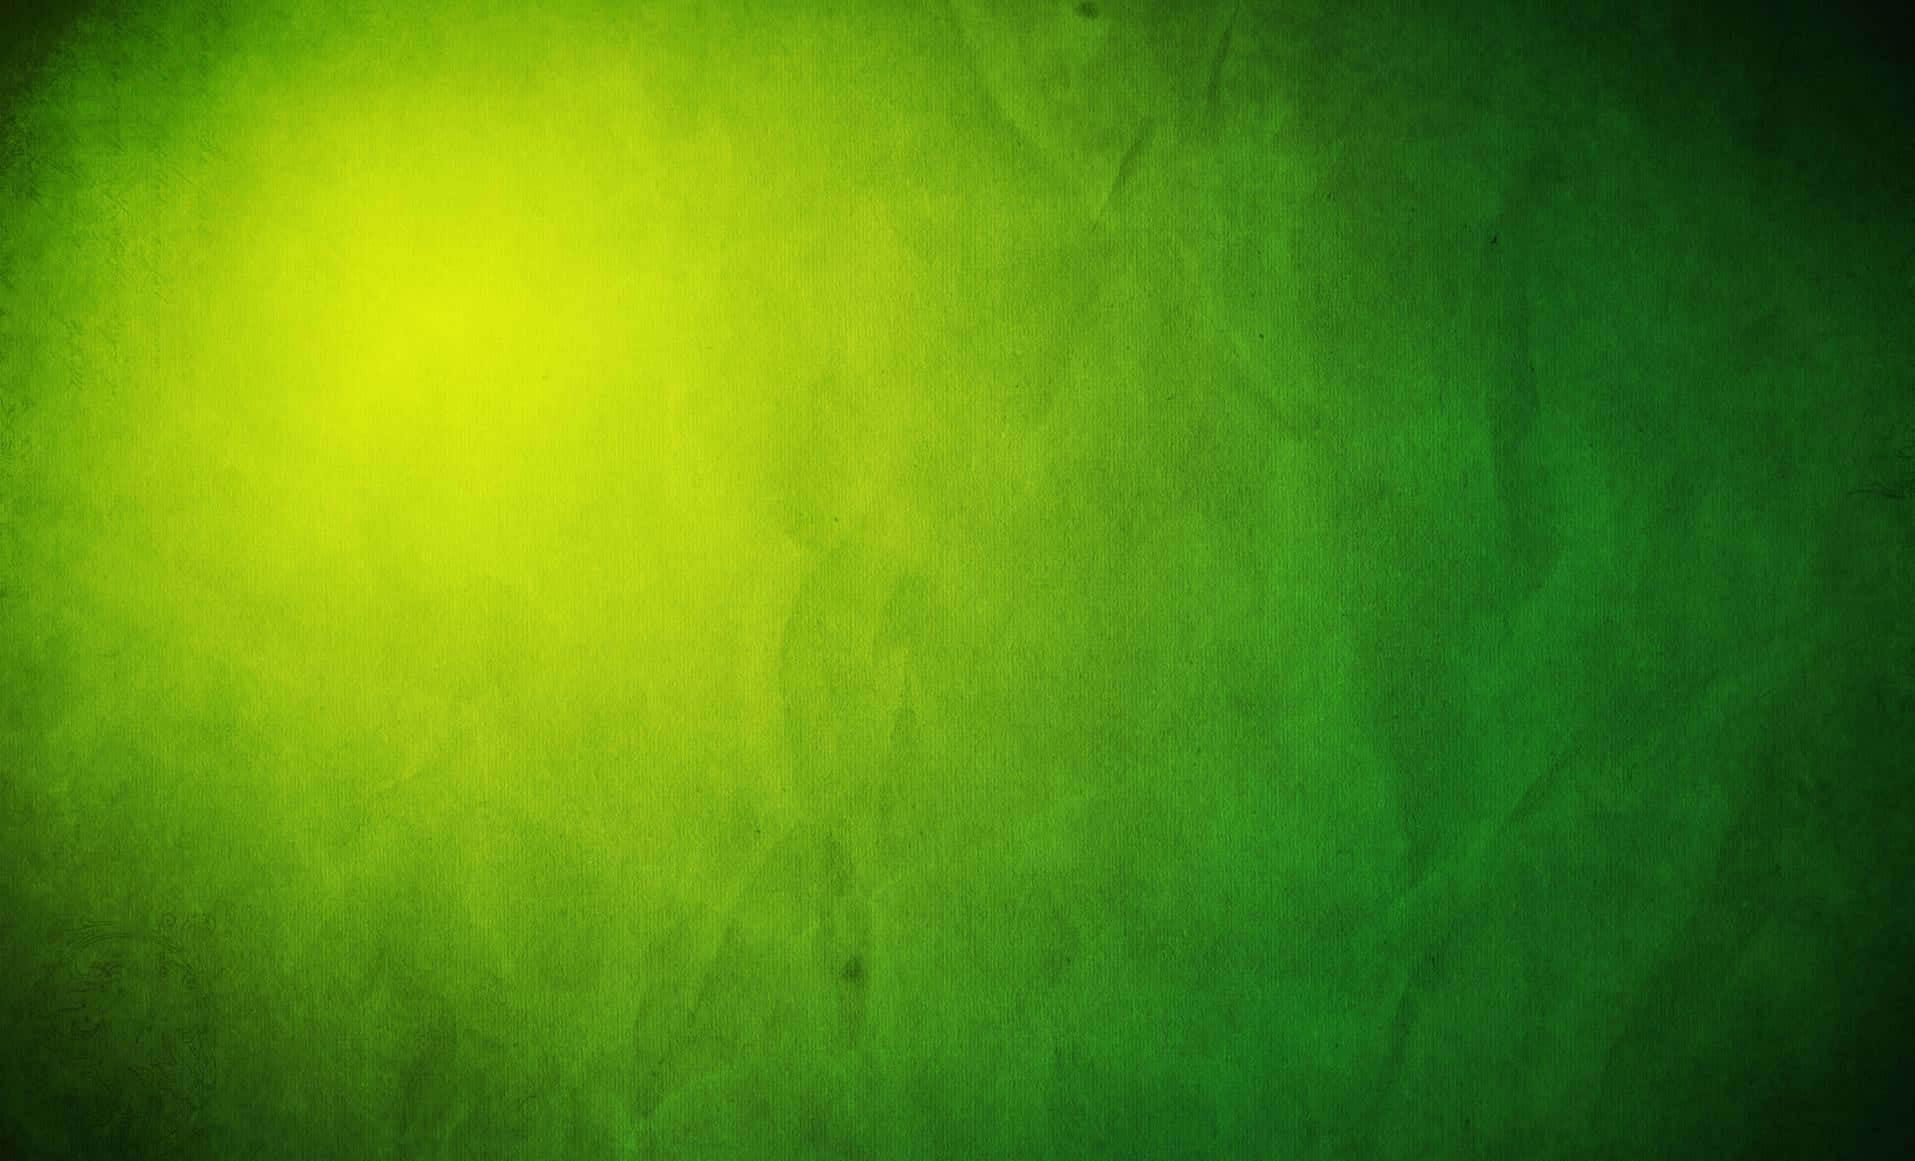 Green And Yellow Background With Light